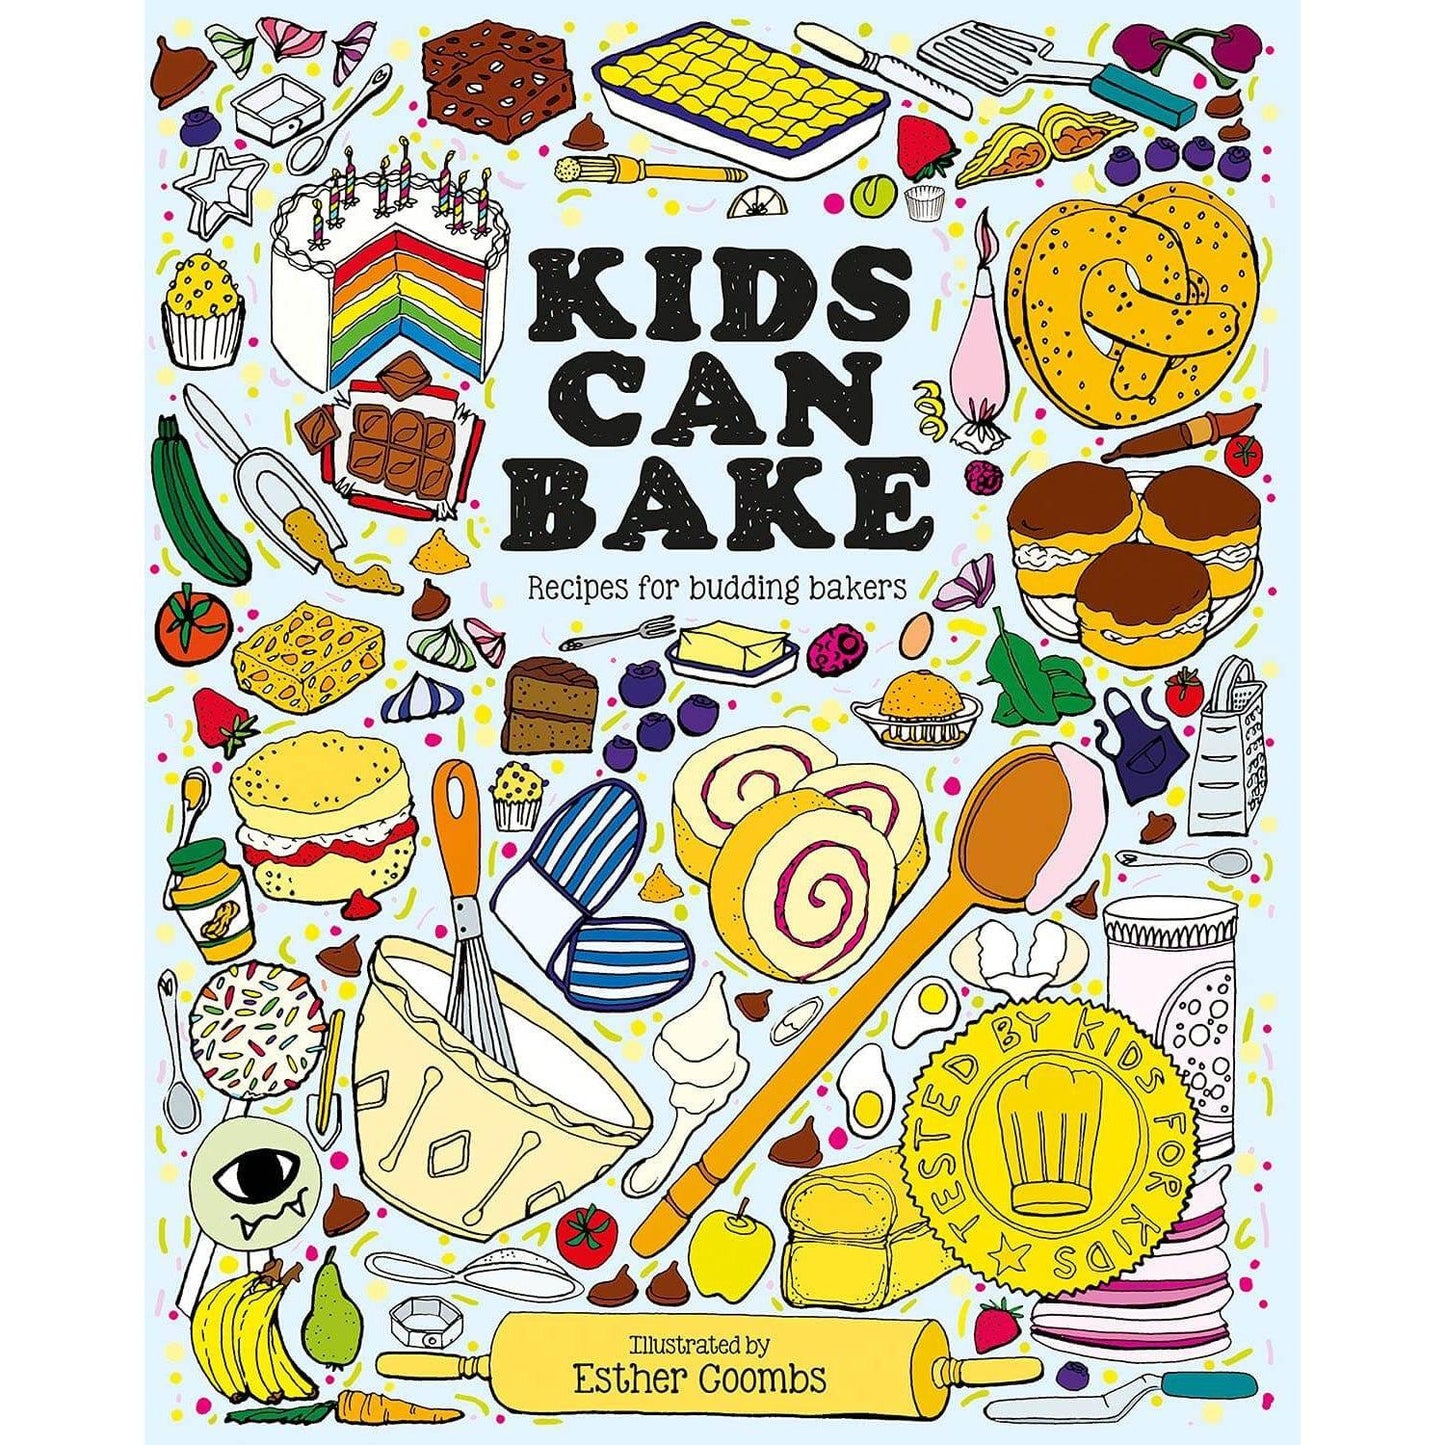 Kids Can Bake: Fun and Yummy Recipes for Budding Bakers Book by Esther Coombs Books Books Various Prettycleanshop